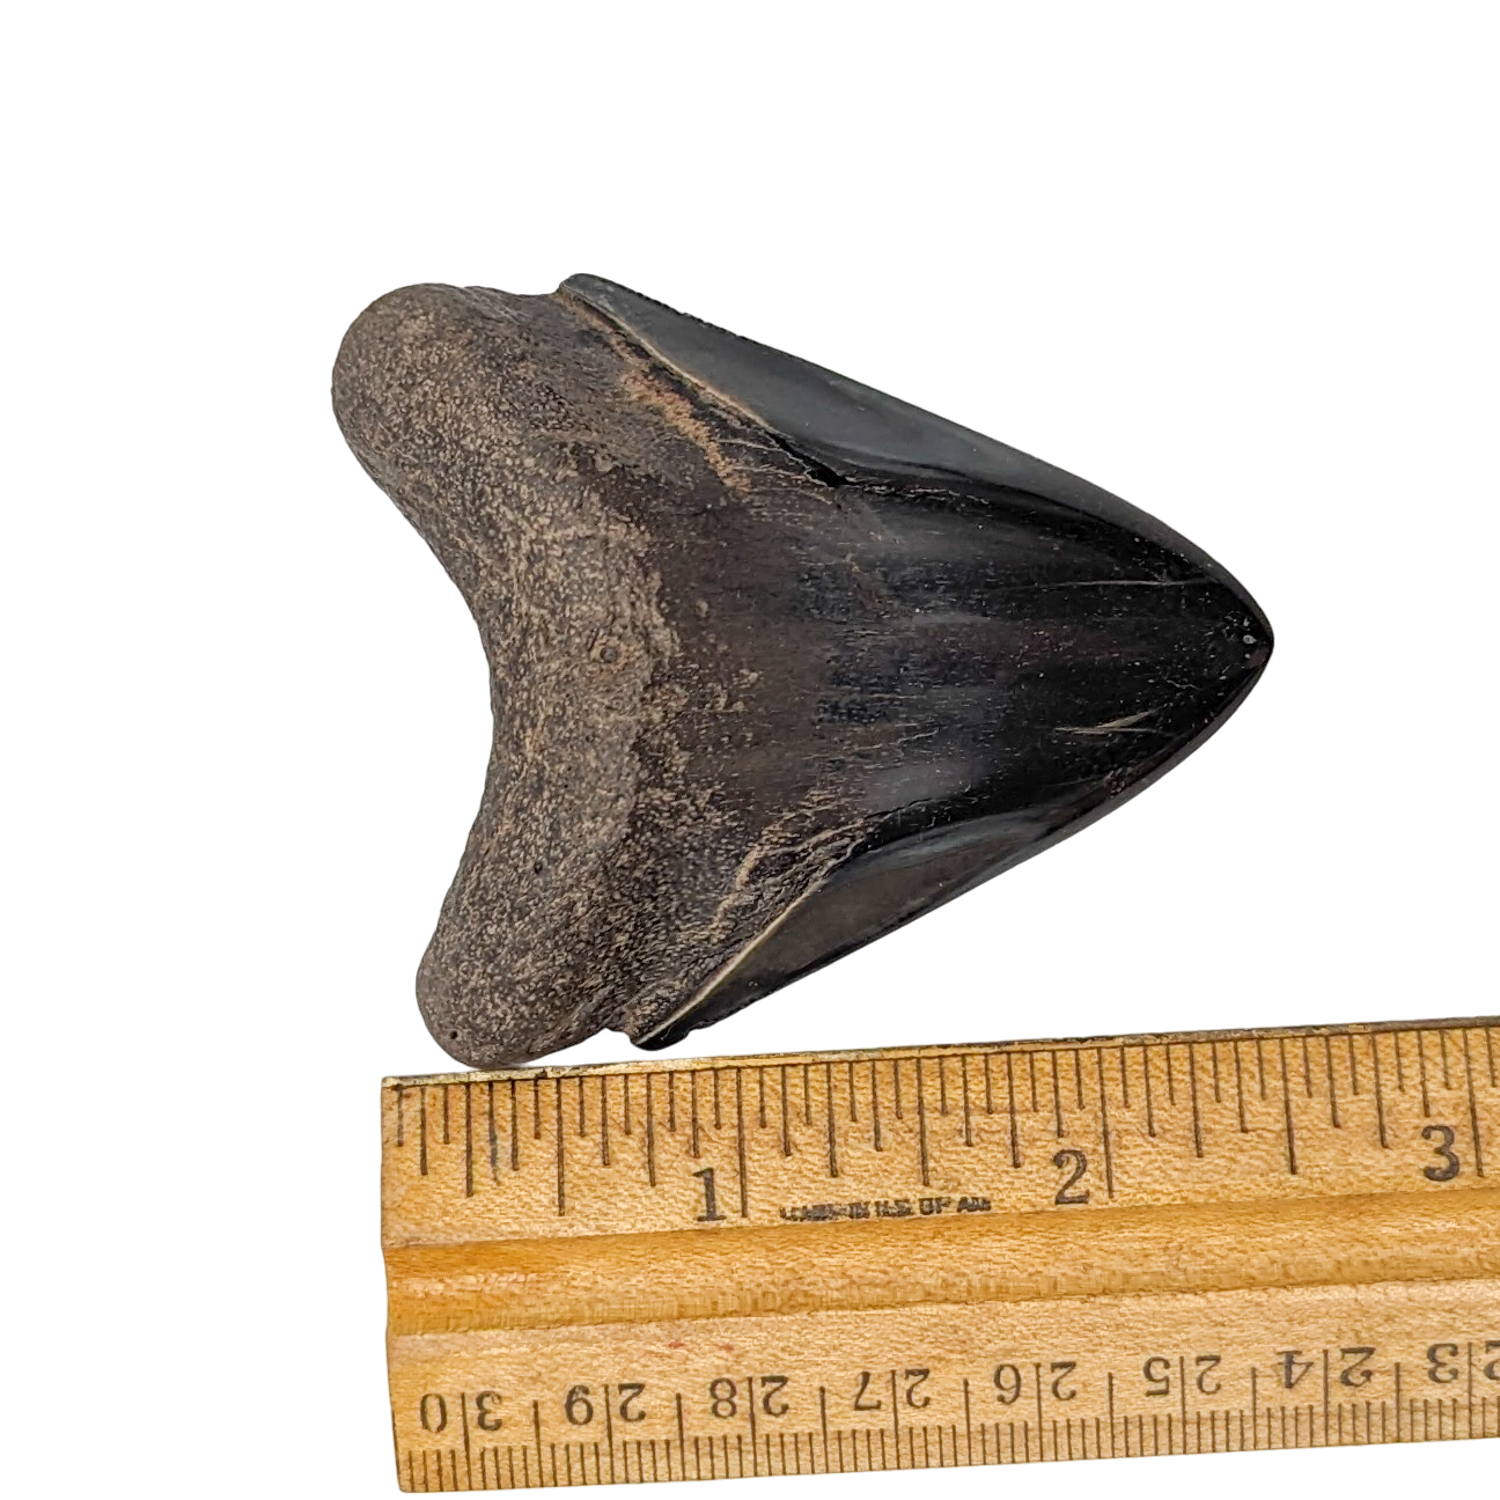 Authentic 2 1/2" Megalodon Shark Tooth Fossil